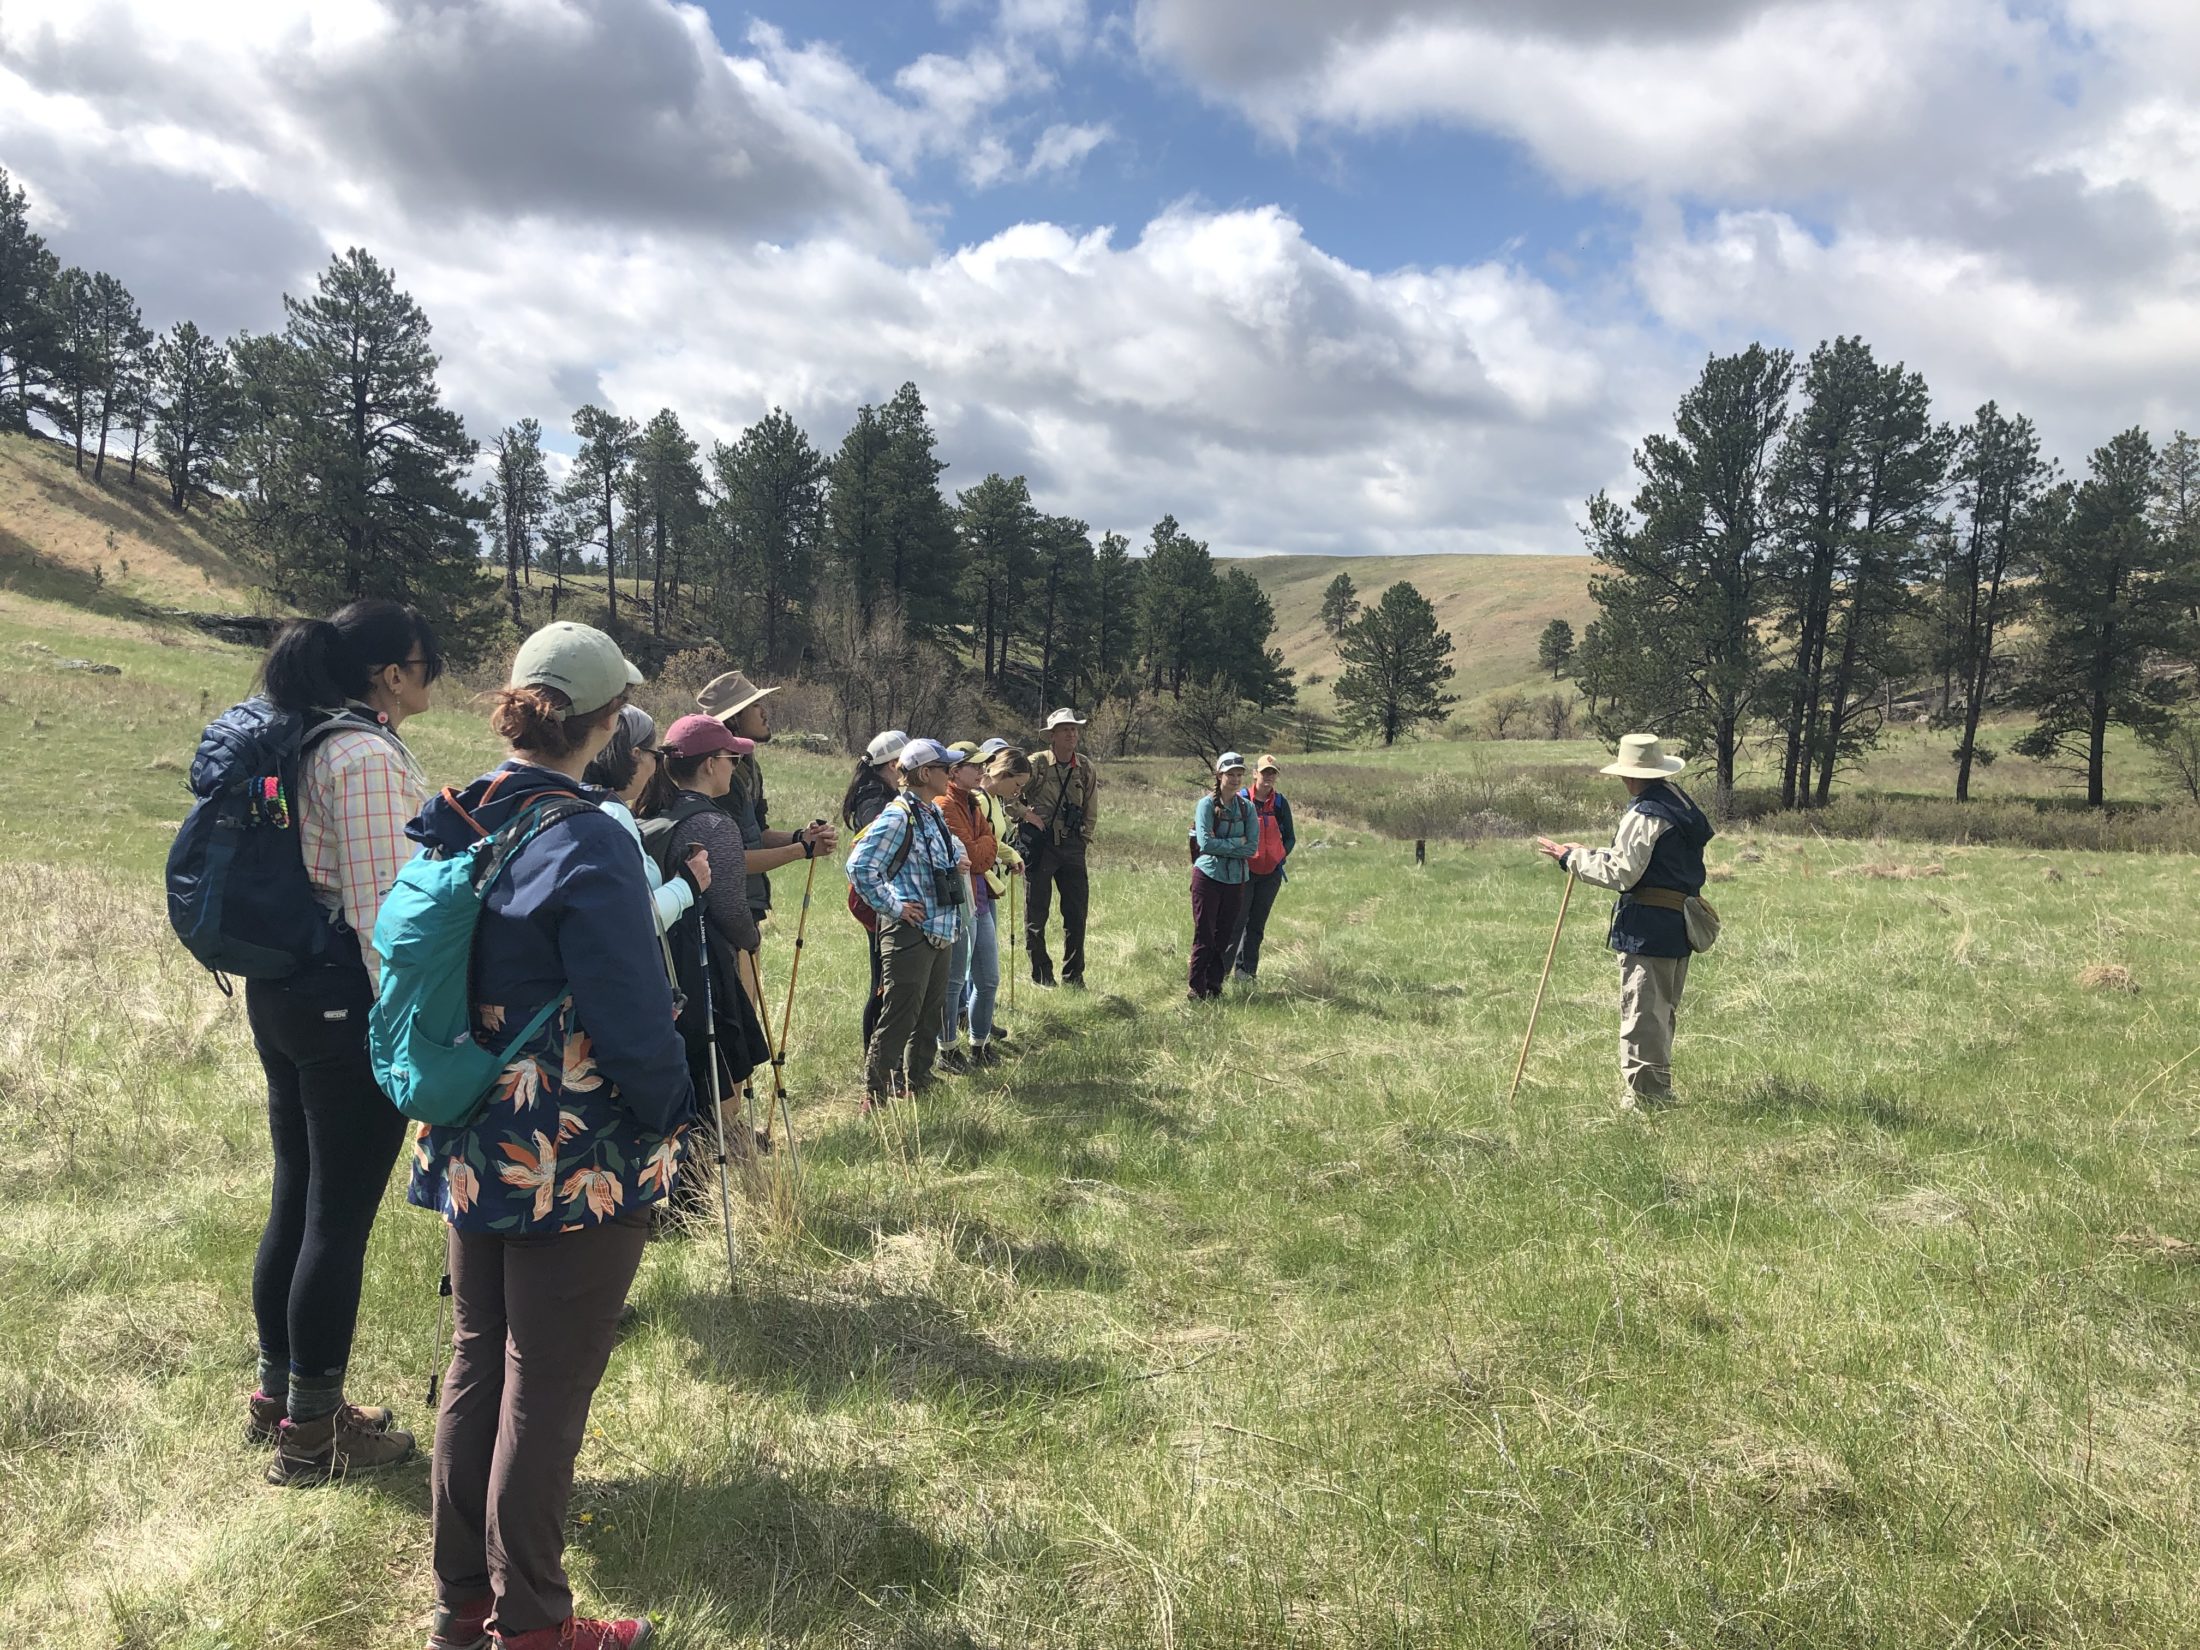 A group of people on a guided hike. It is spring, there are ponderosa pine trees and green grass, with large puffy clouds in the sky. The instructor is a female wearing a tan hat, with a navy blue jacket